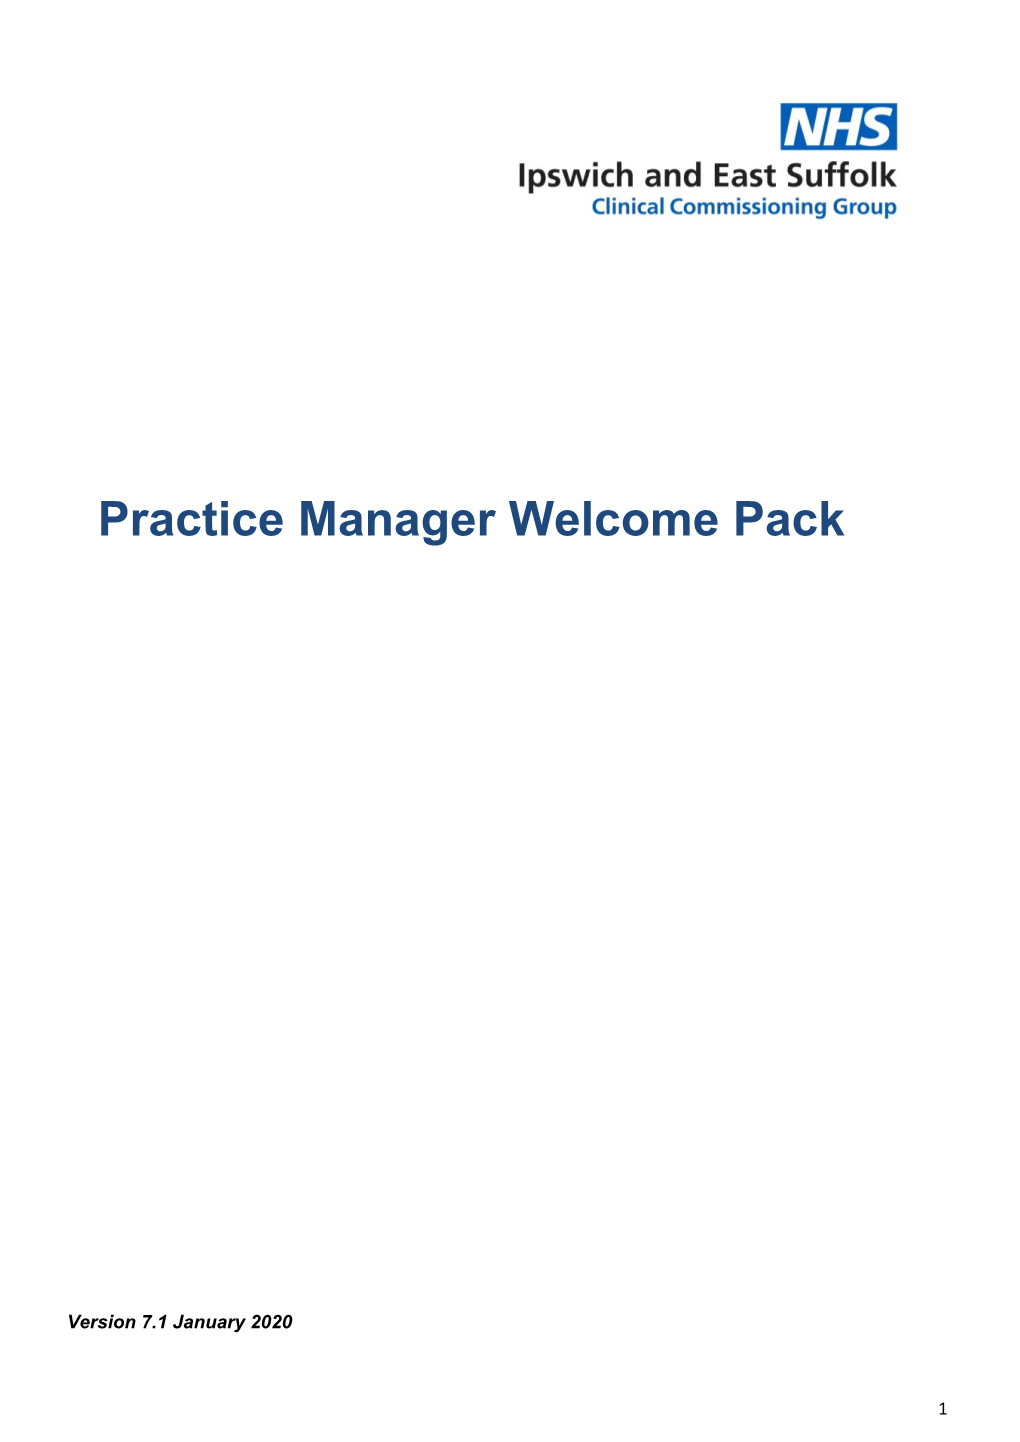 Practice Manager Welcome Pack